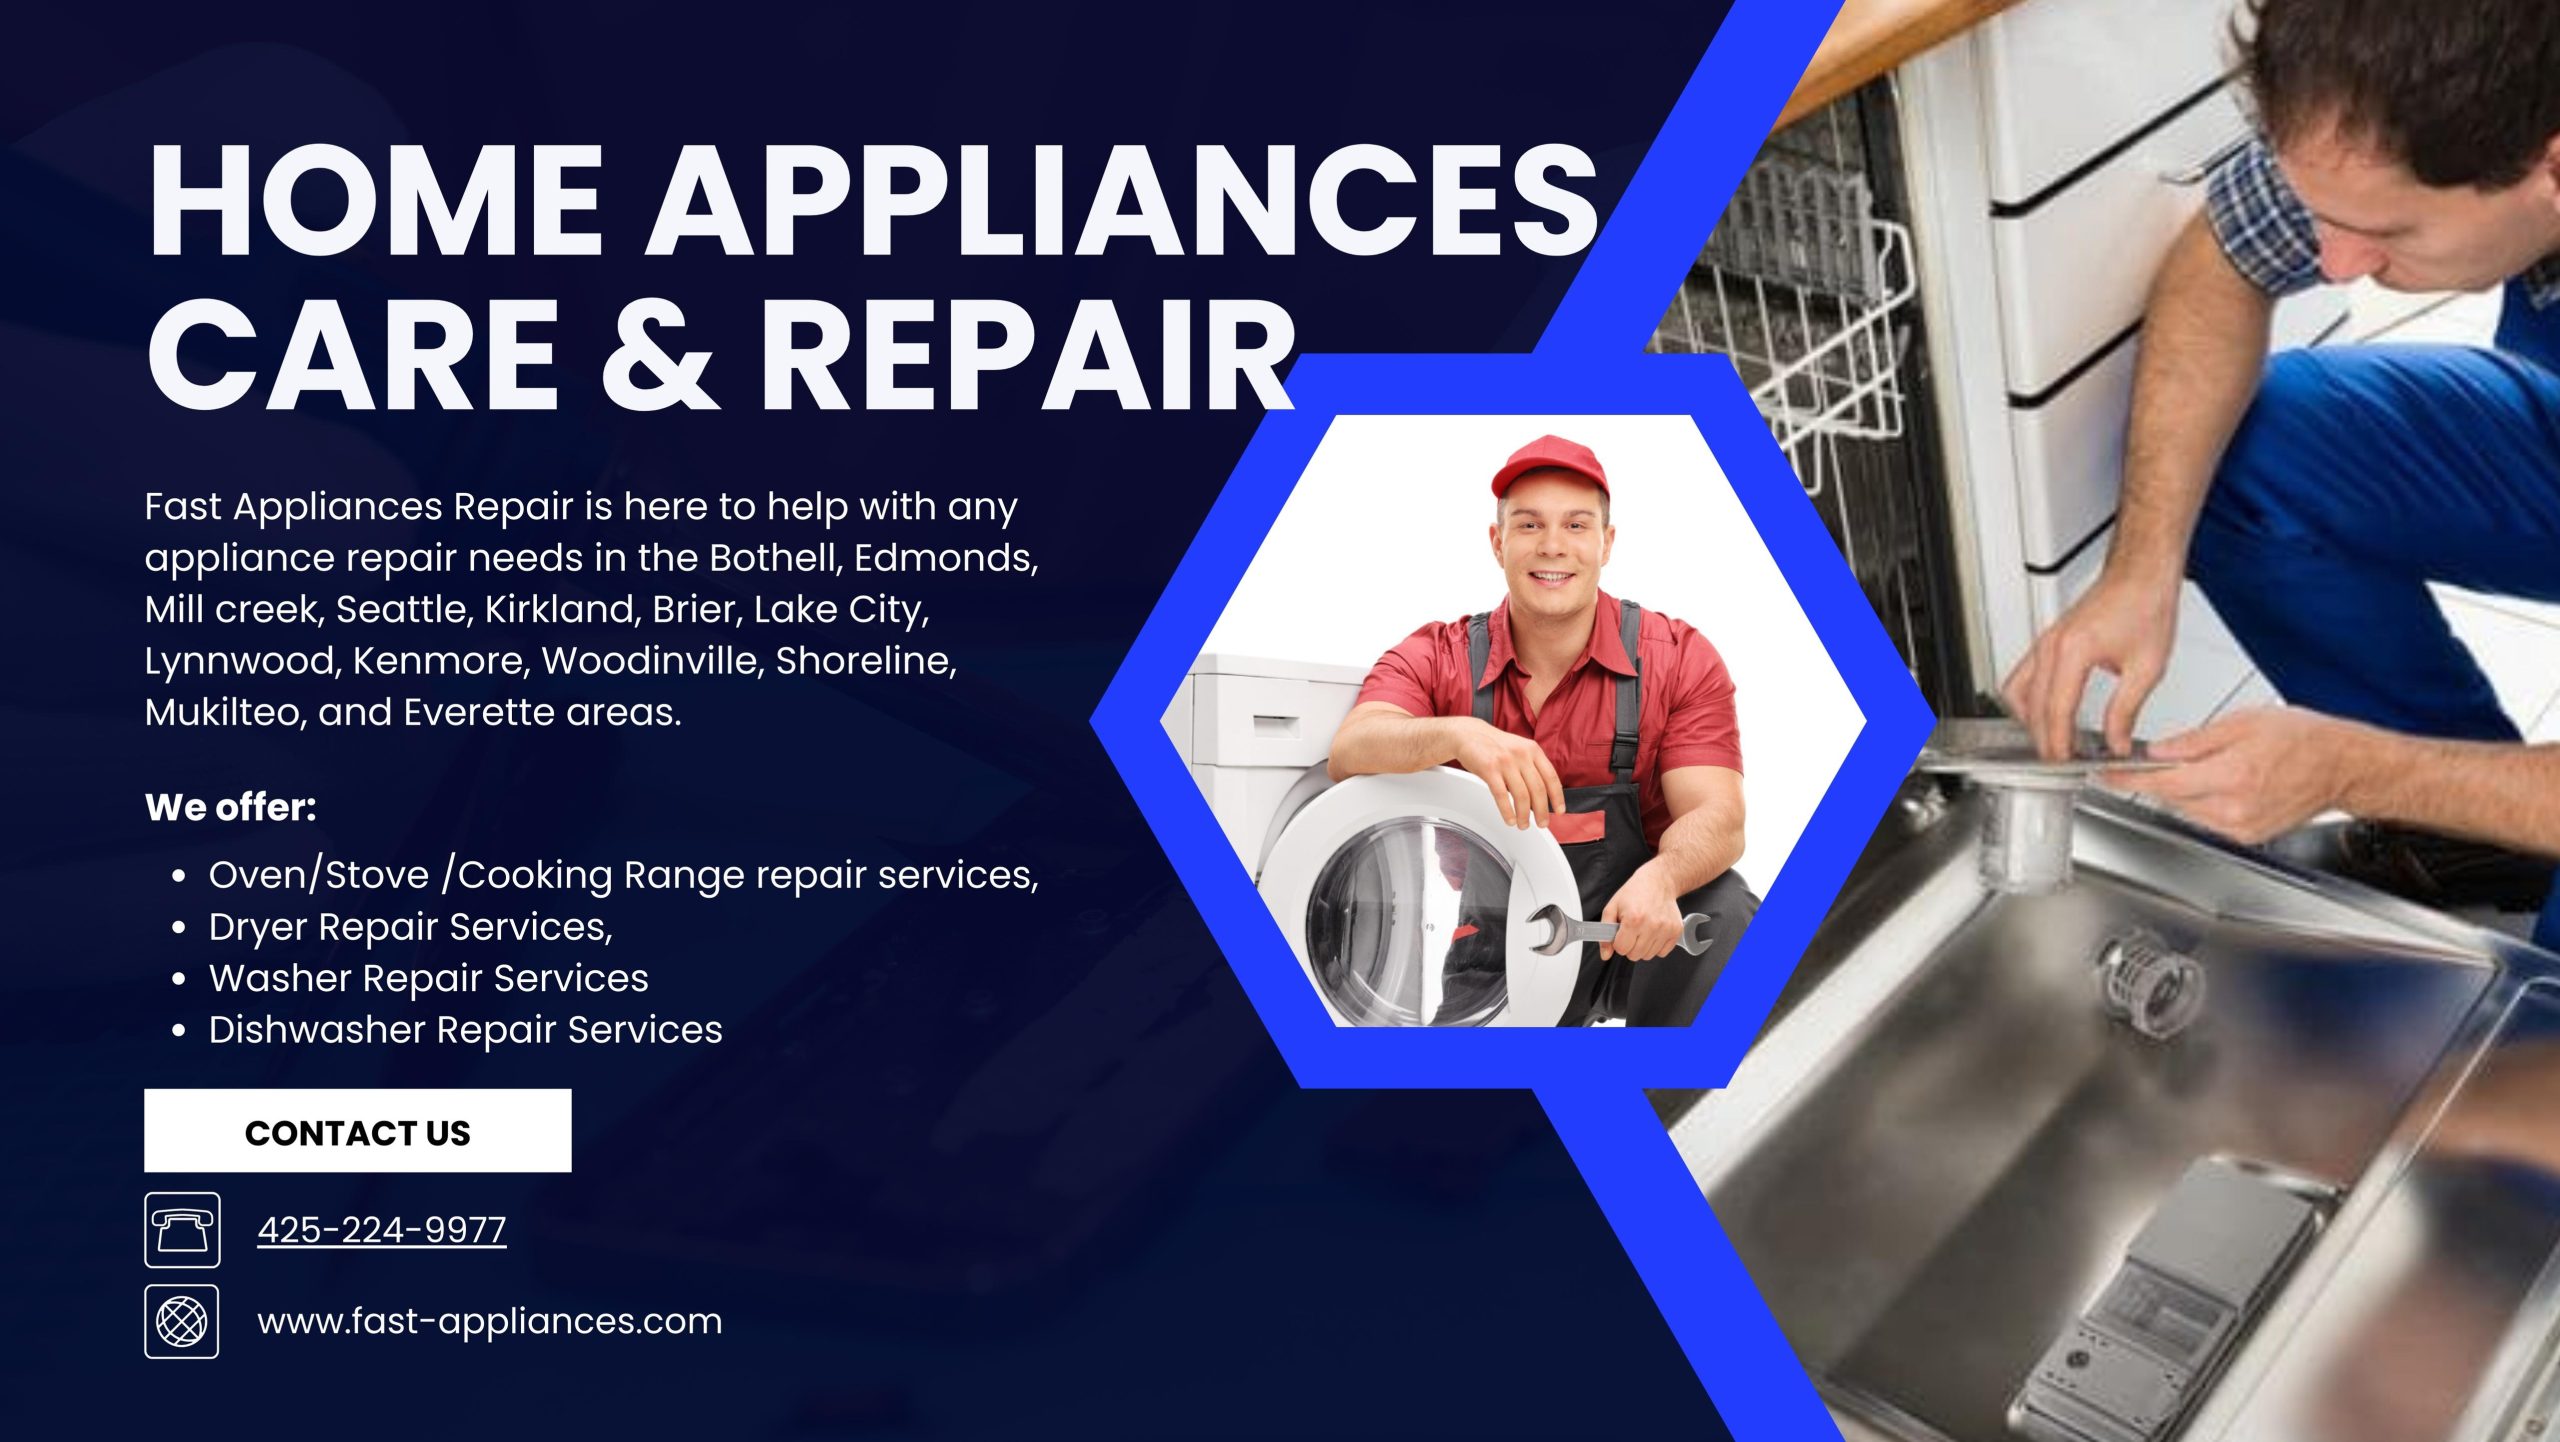 Home Appliances Care and Repair